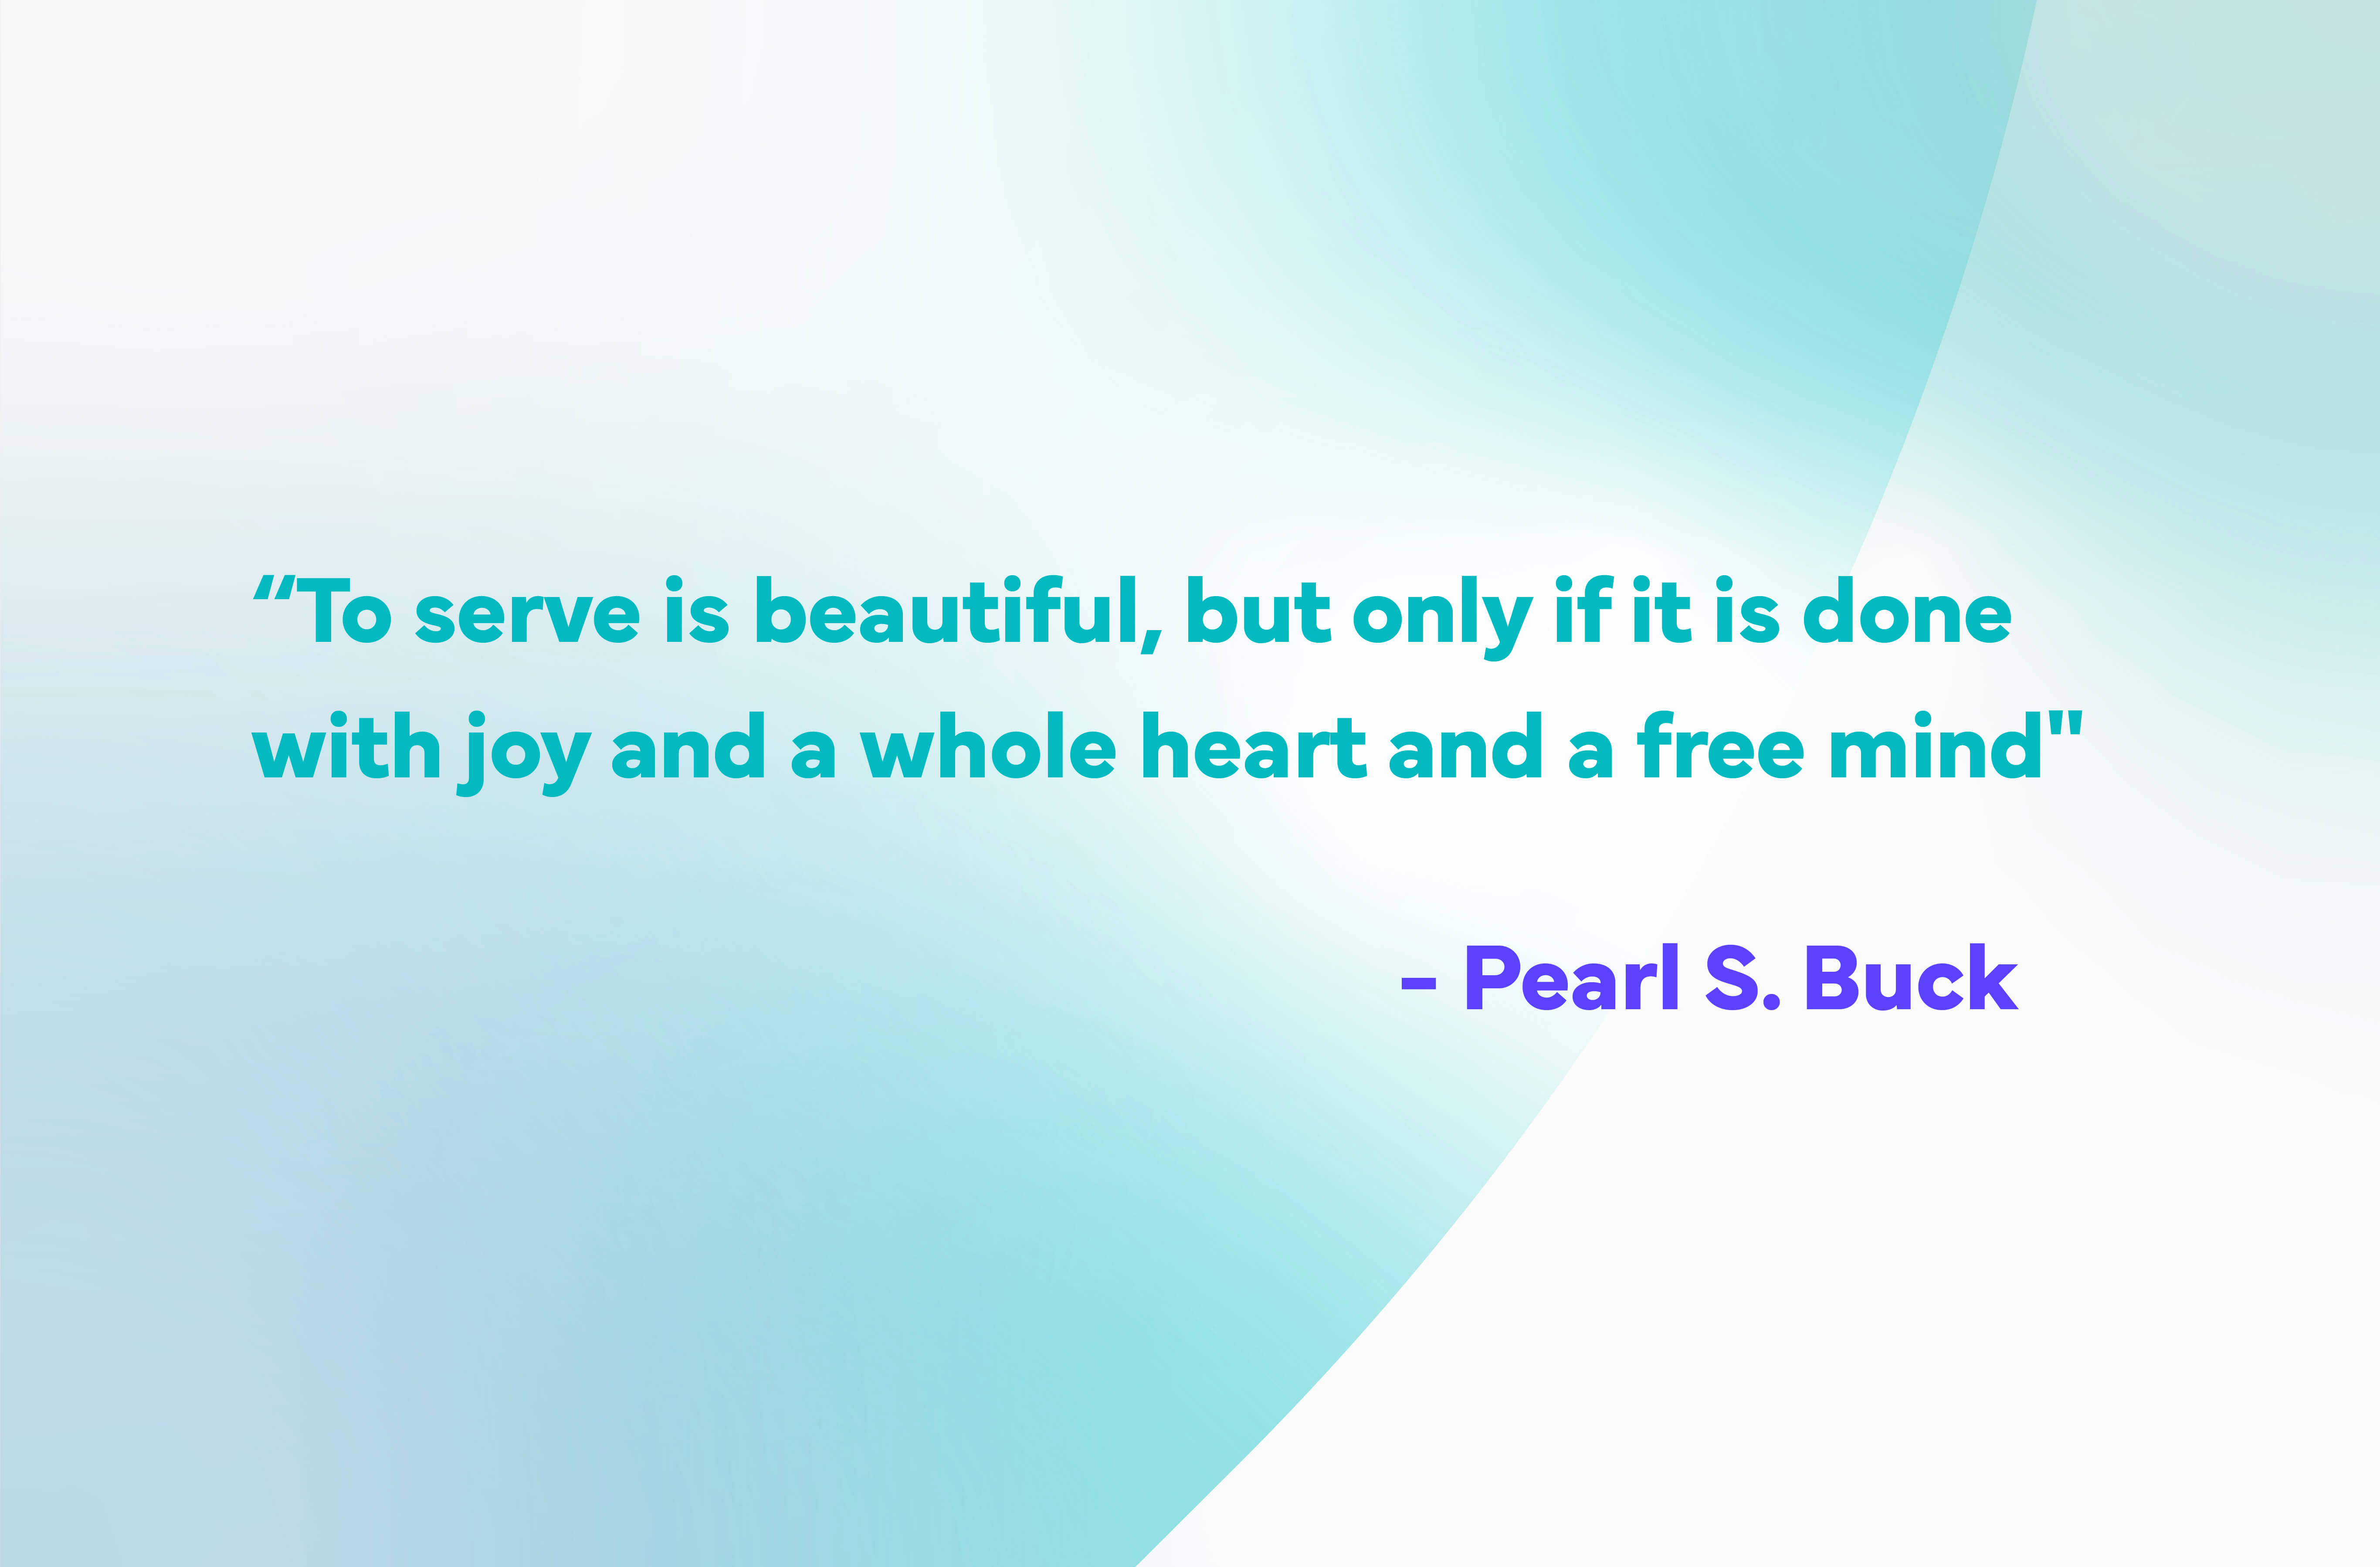 Volunteer-Quotes-pearl s buck to serve is beautiful if done with joy (13)